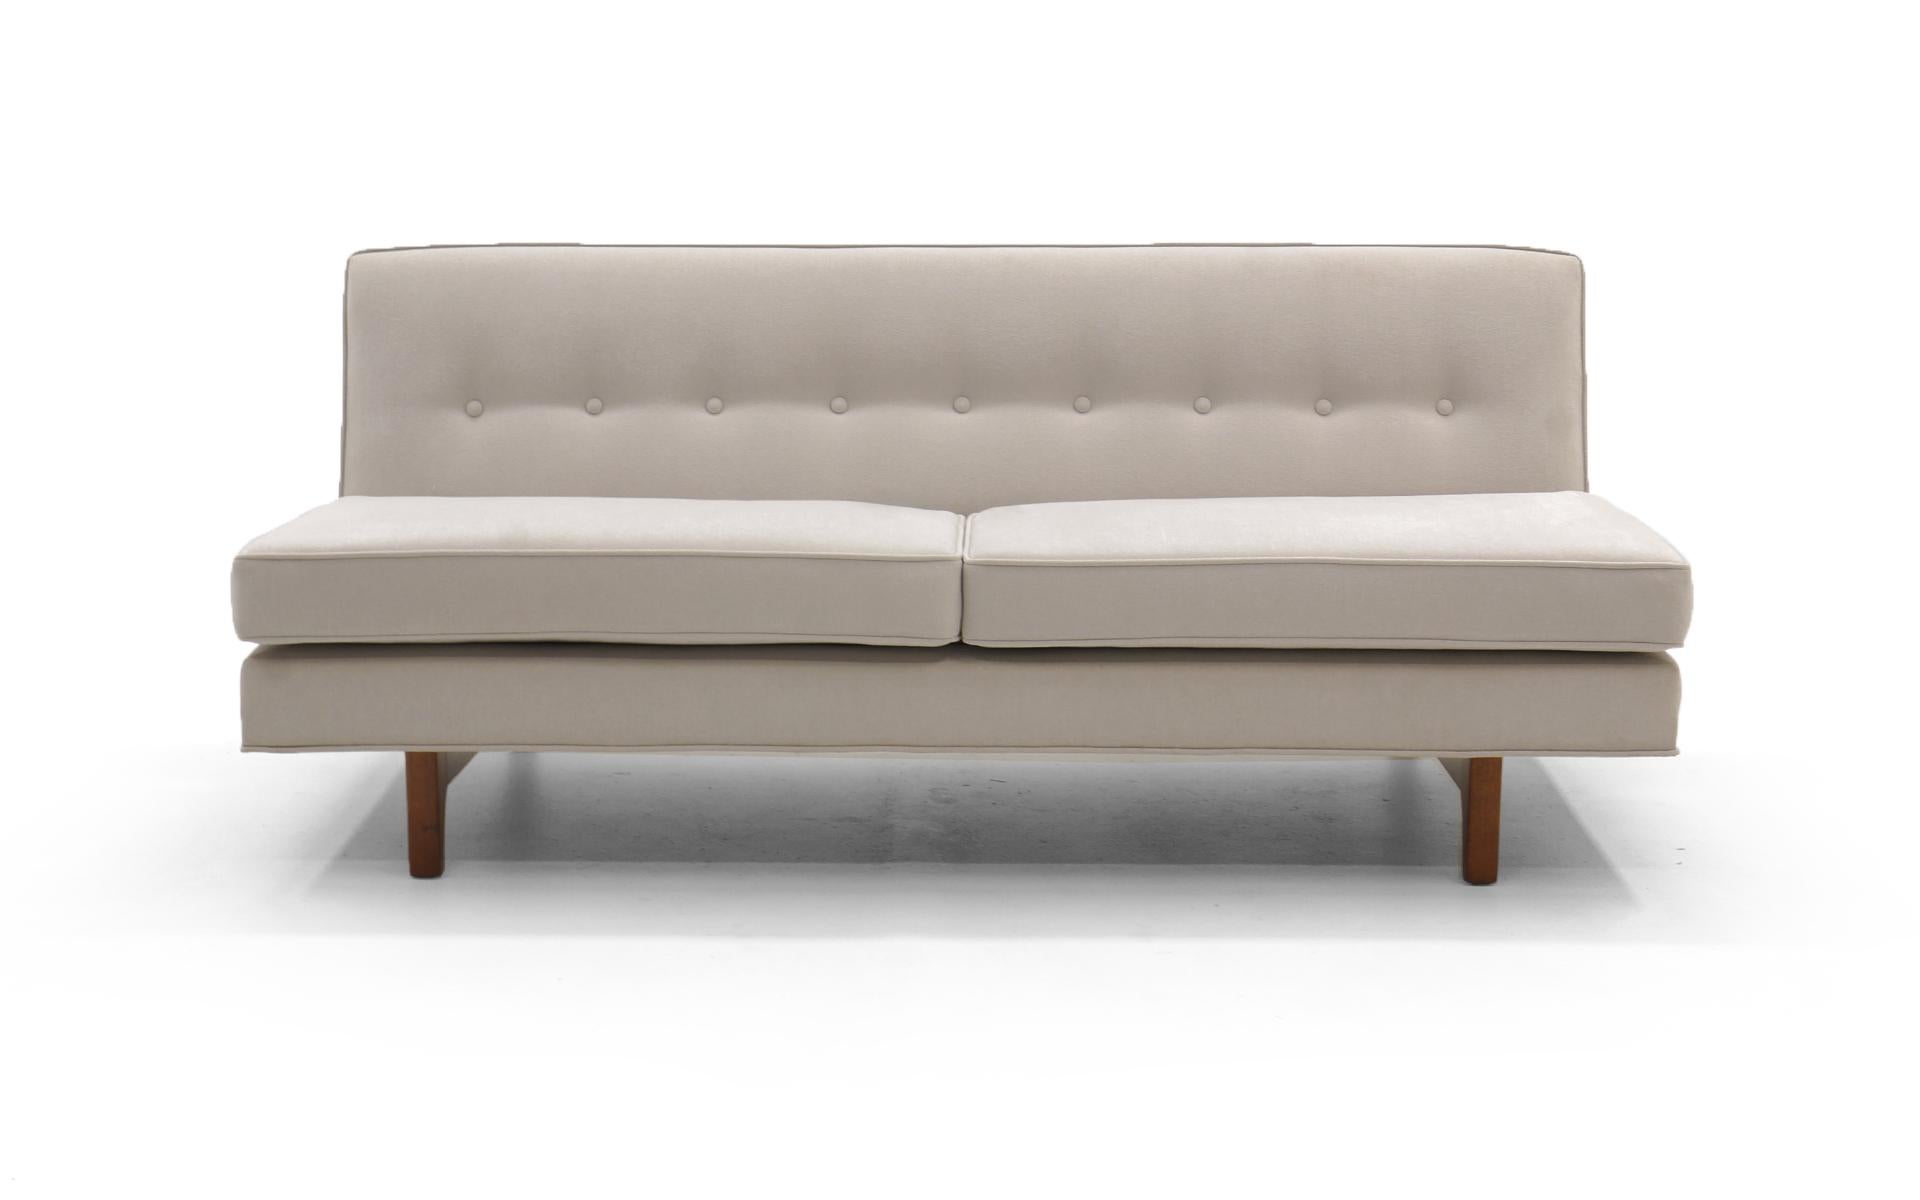 Mid-Century Modern Loveseat or Settee by Edward Wormley Restored to Perfection Knoll Upholstery